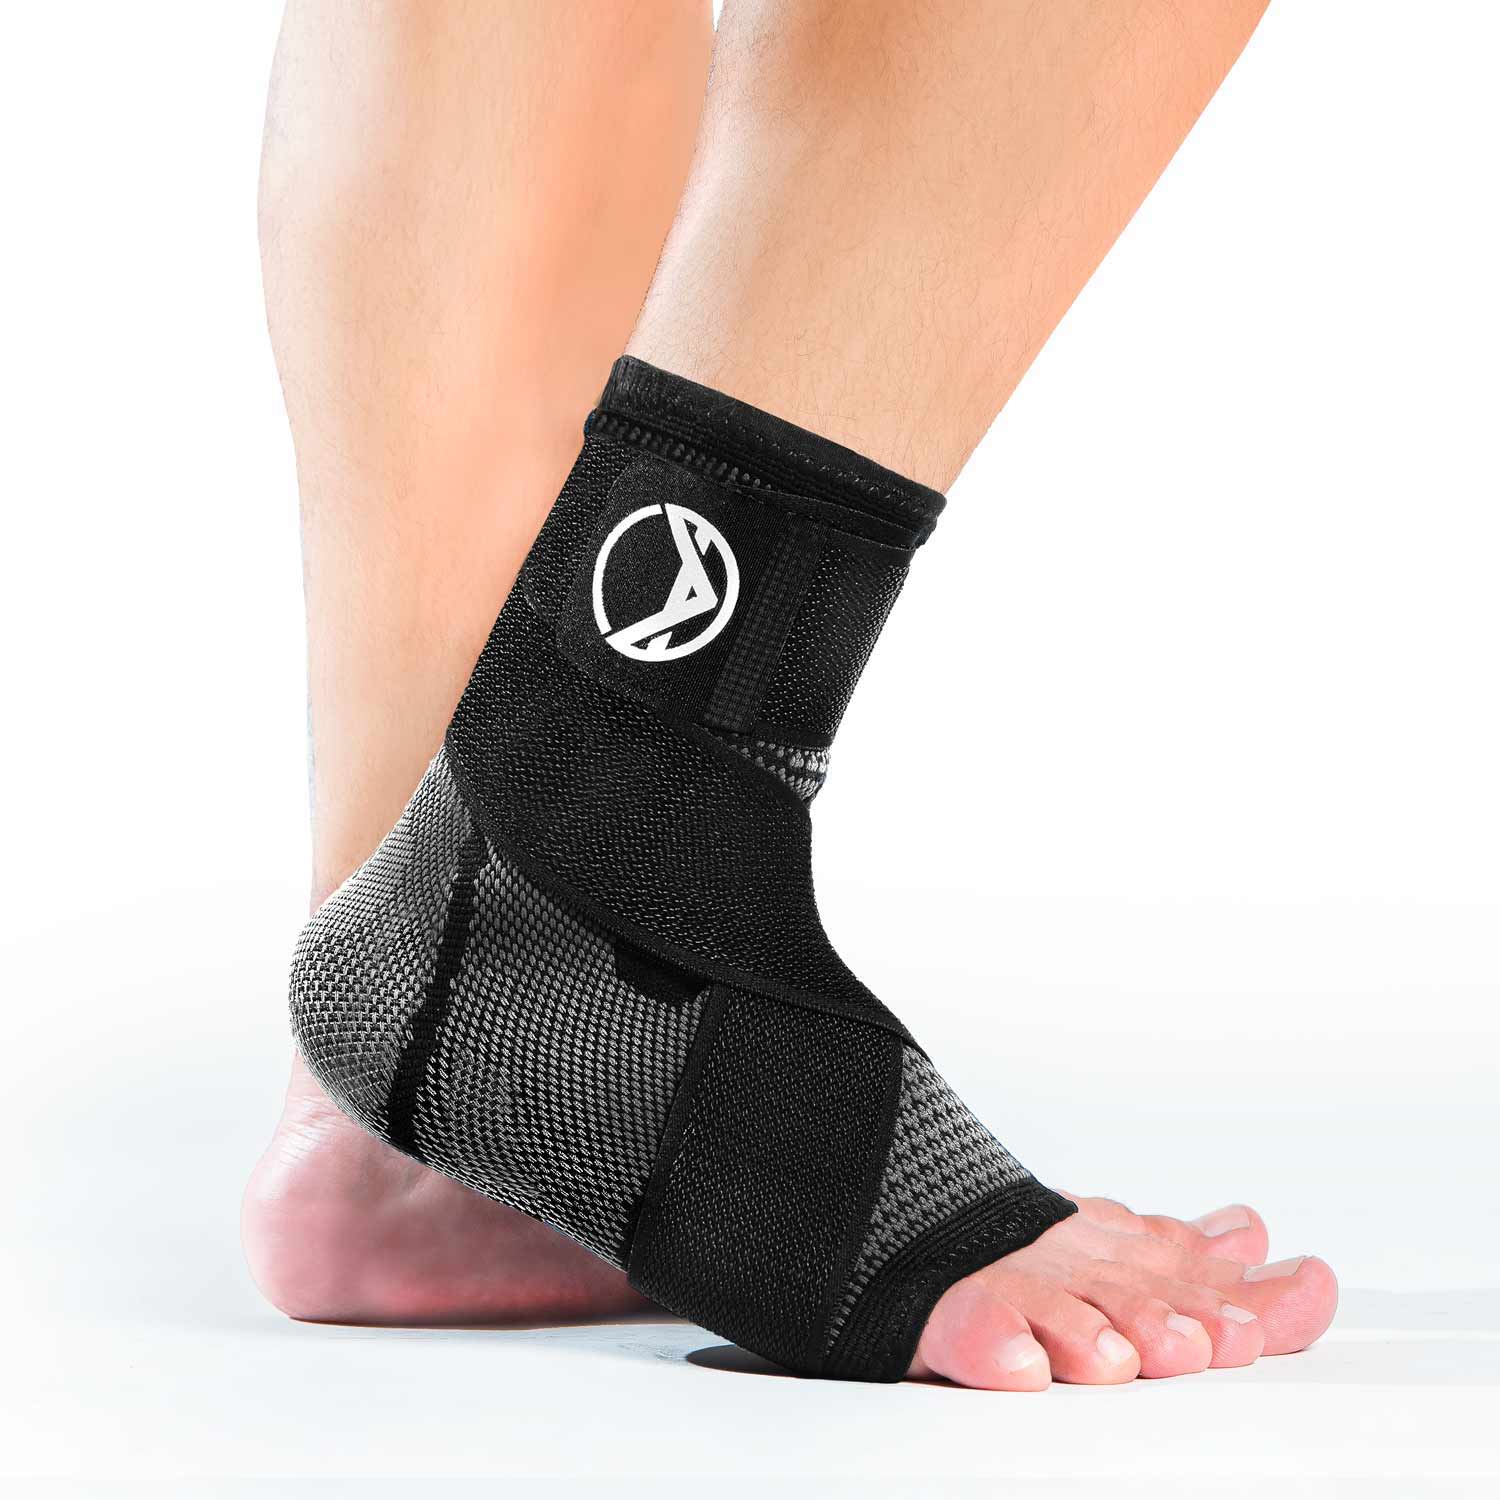 Koprez plantar fasciitis sleeve for ankle compression and support